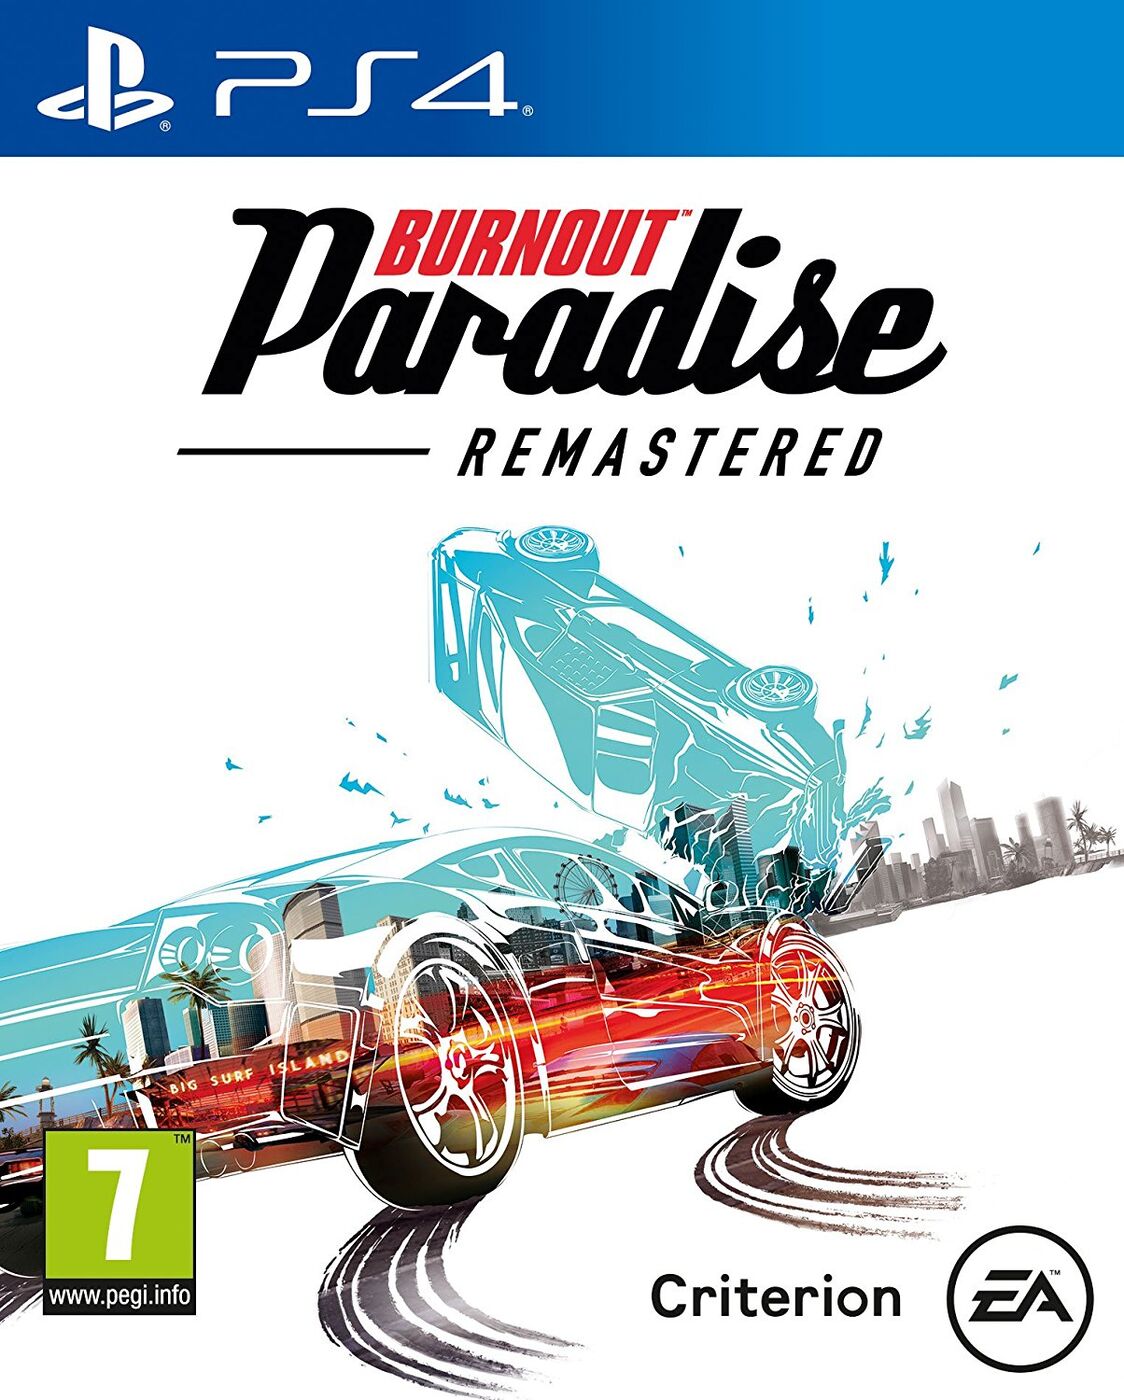 is a ps4 controller compatible with burnout paradise for pc